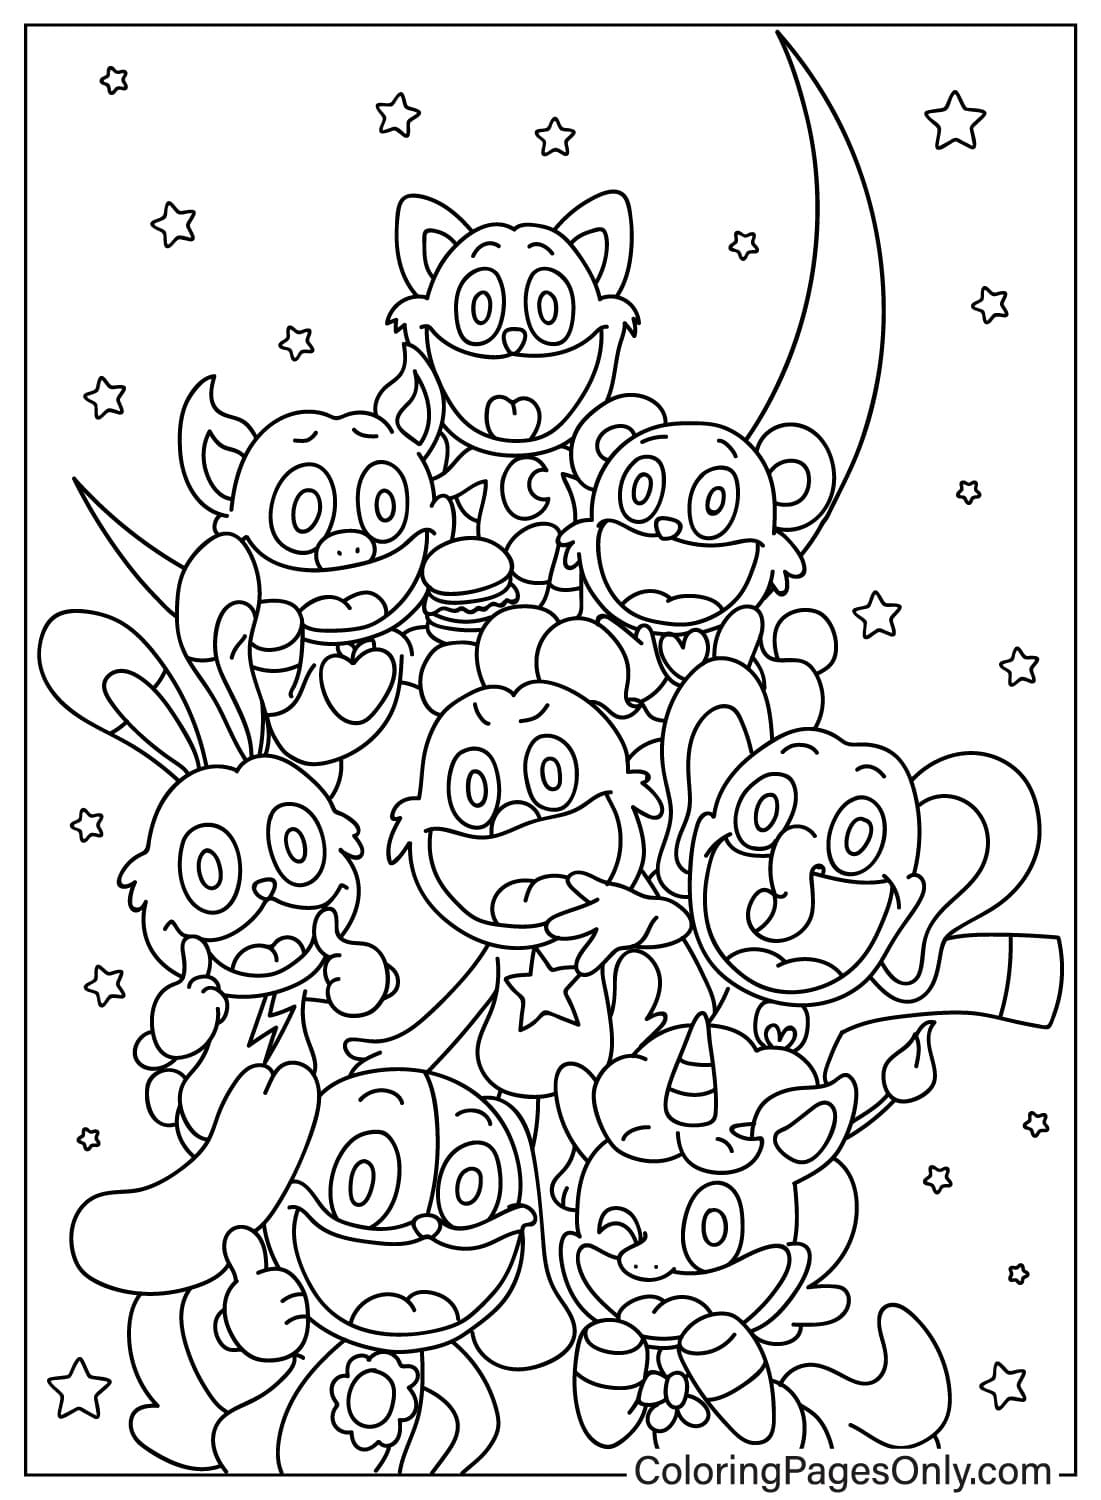 Smiling Critters Free Coloring Page from Smiling Critters